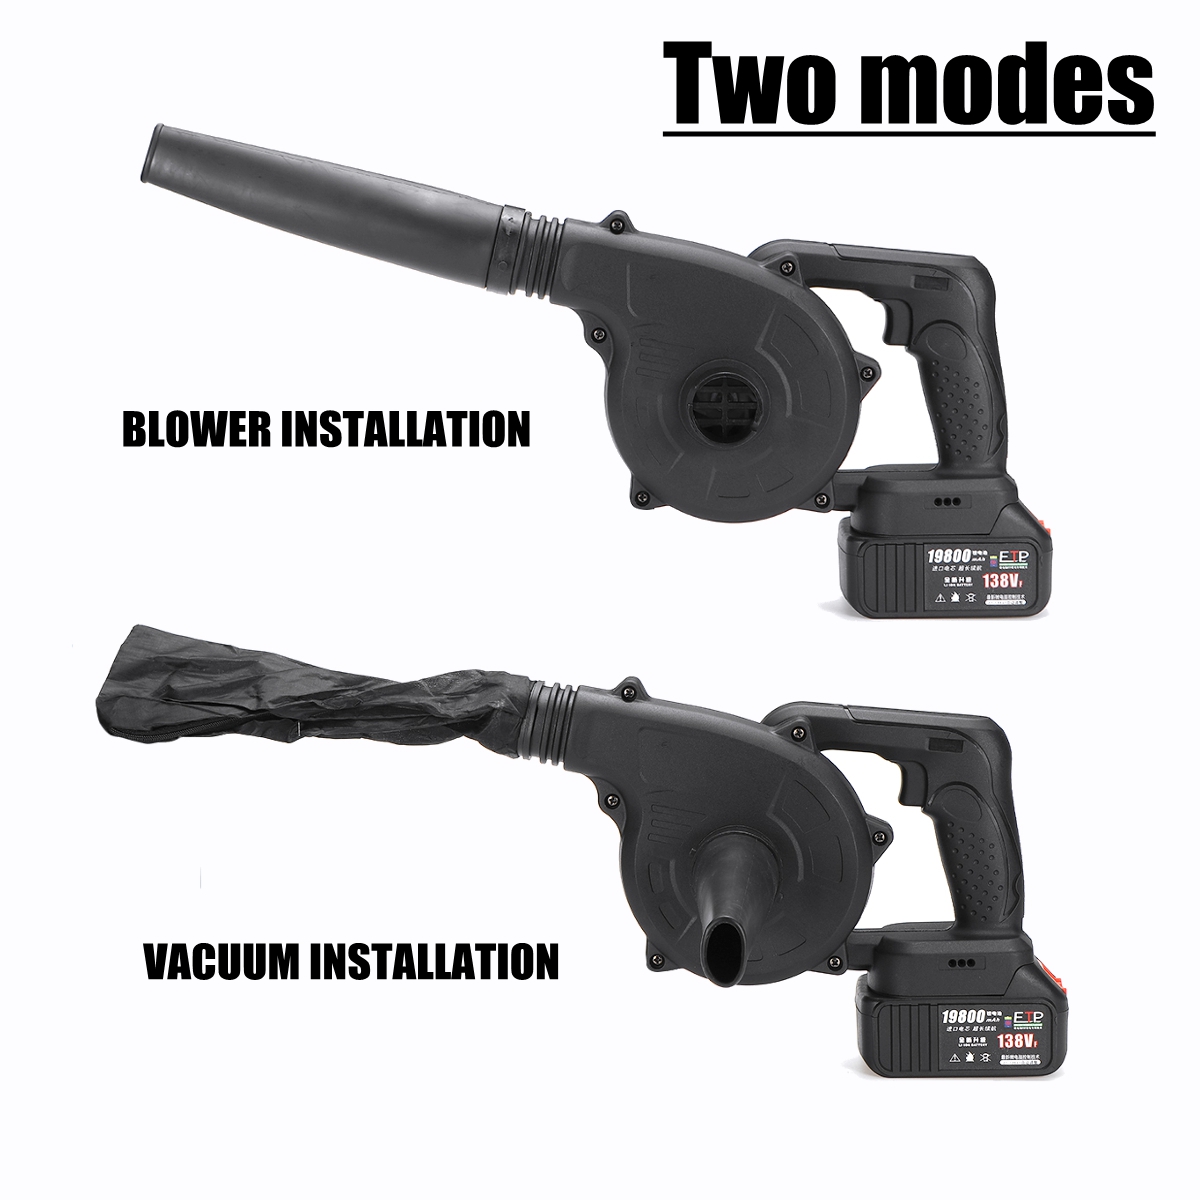 110V-2-In-1-Cordless-Electric-Blower-Multifunctional-for-Home-Car-Cleaning-1606889-2